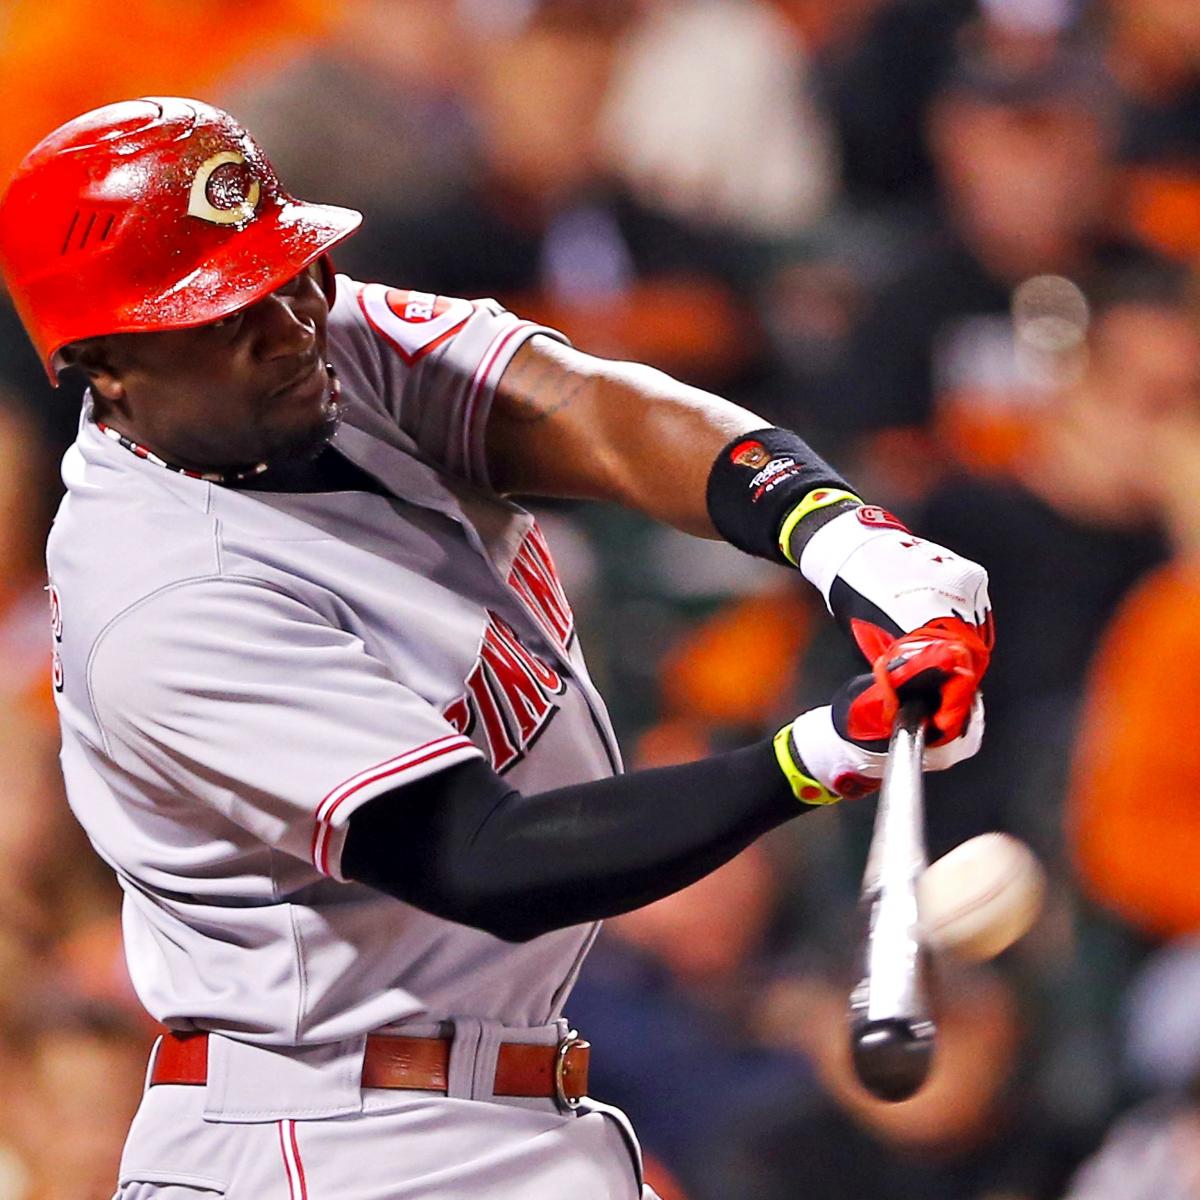 Reds vs. Giants Score, Twitter Reaction, Grades and More News